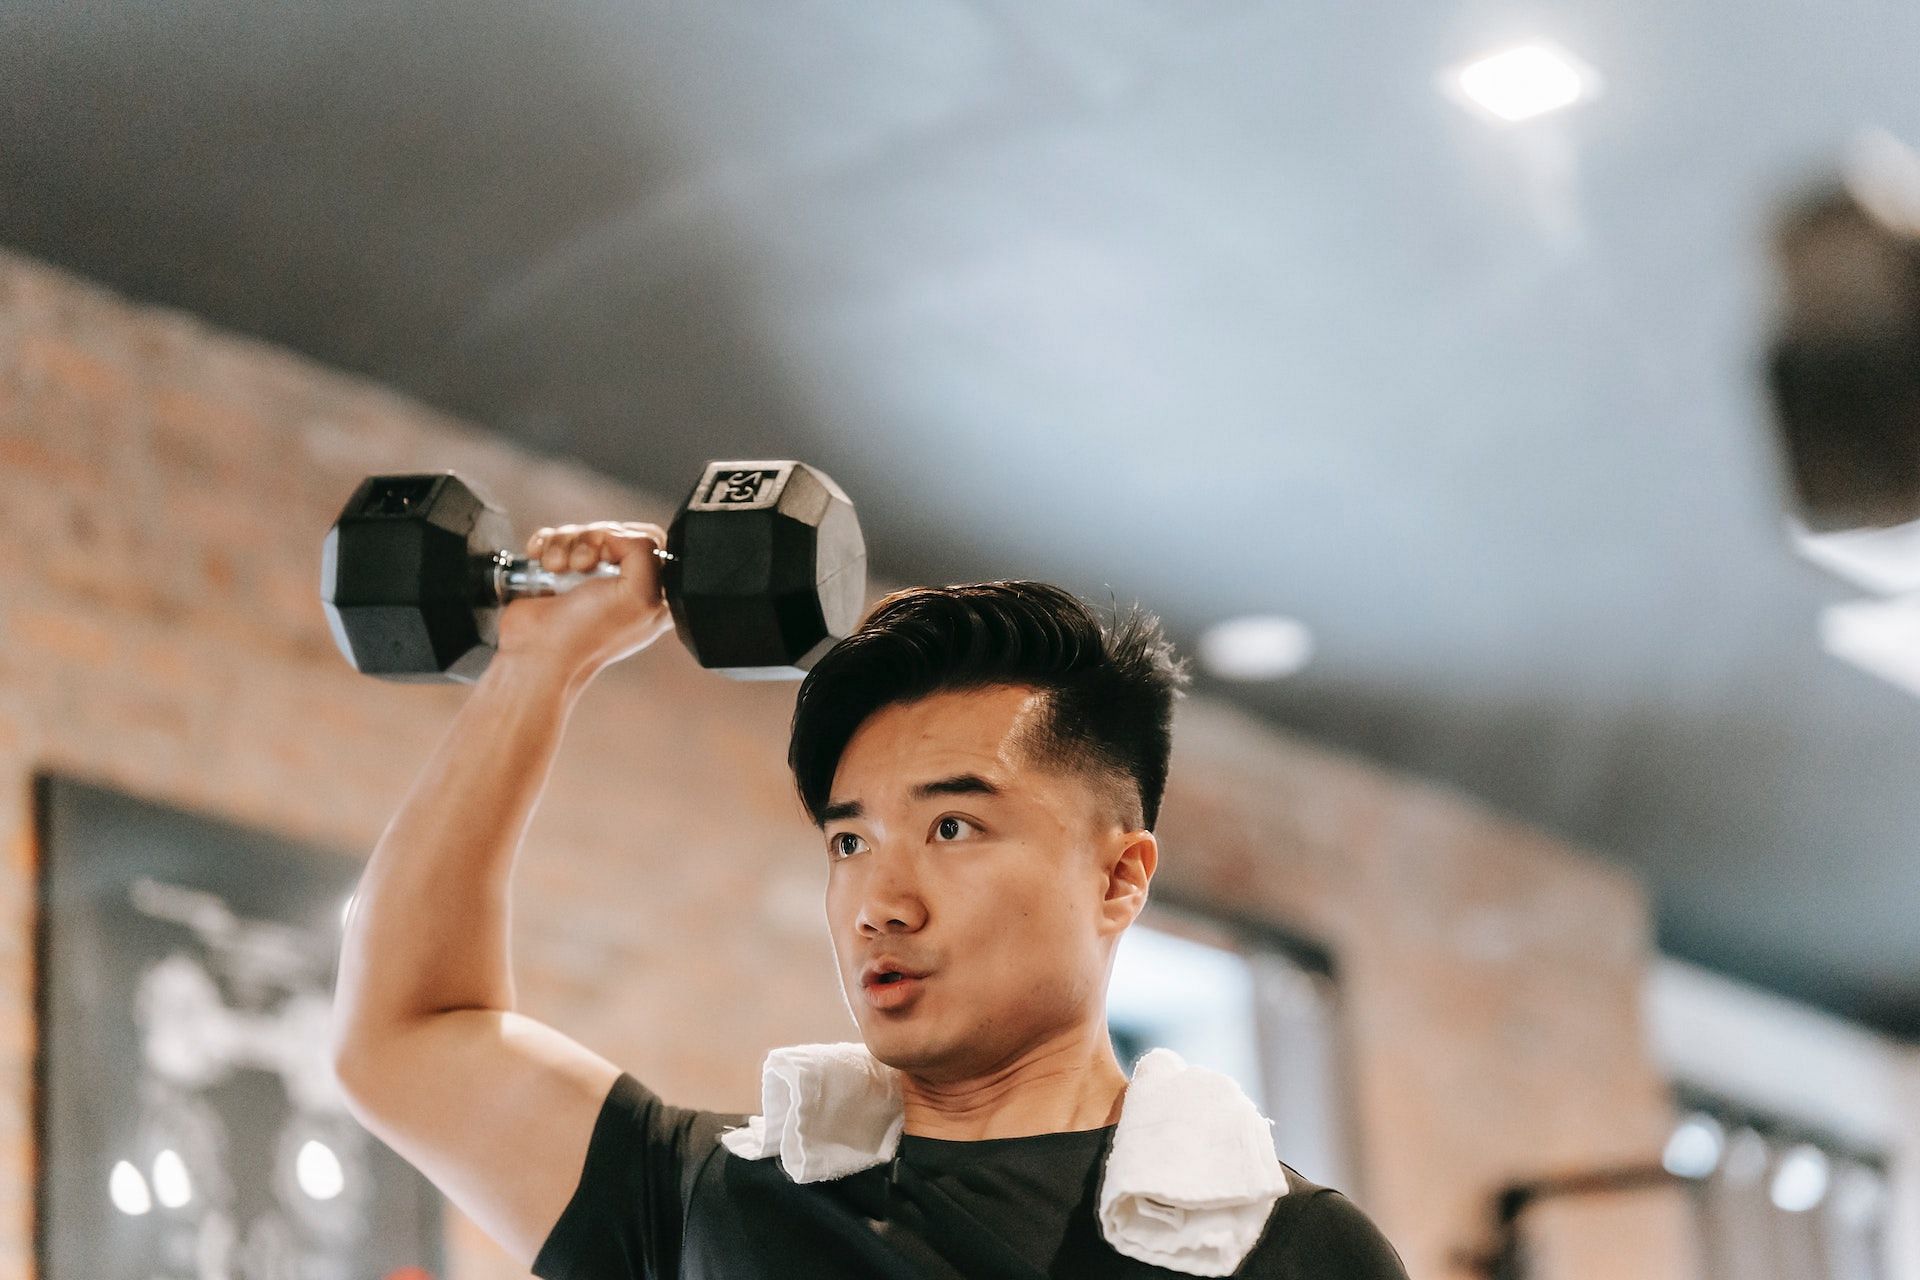 Overhead press variation exercises can build shoulder strength. (Photo via Pexels/Andres  Ayrton)